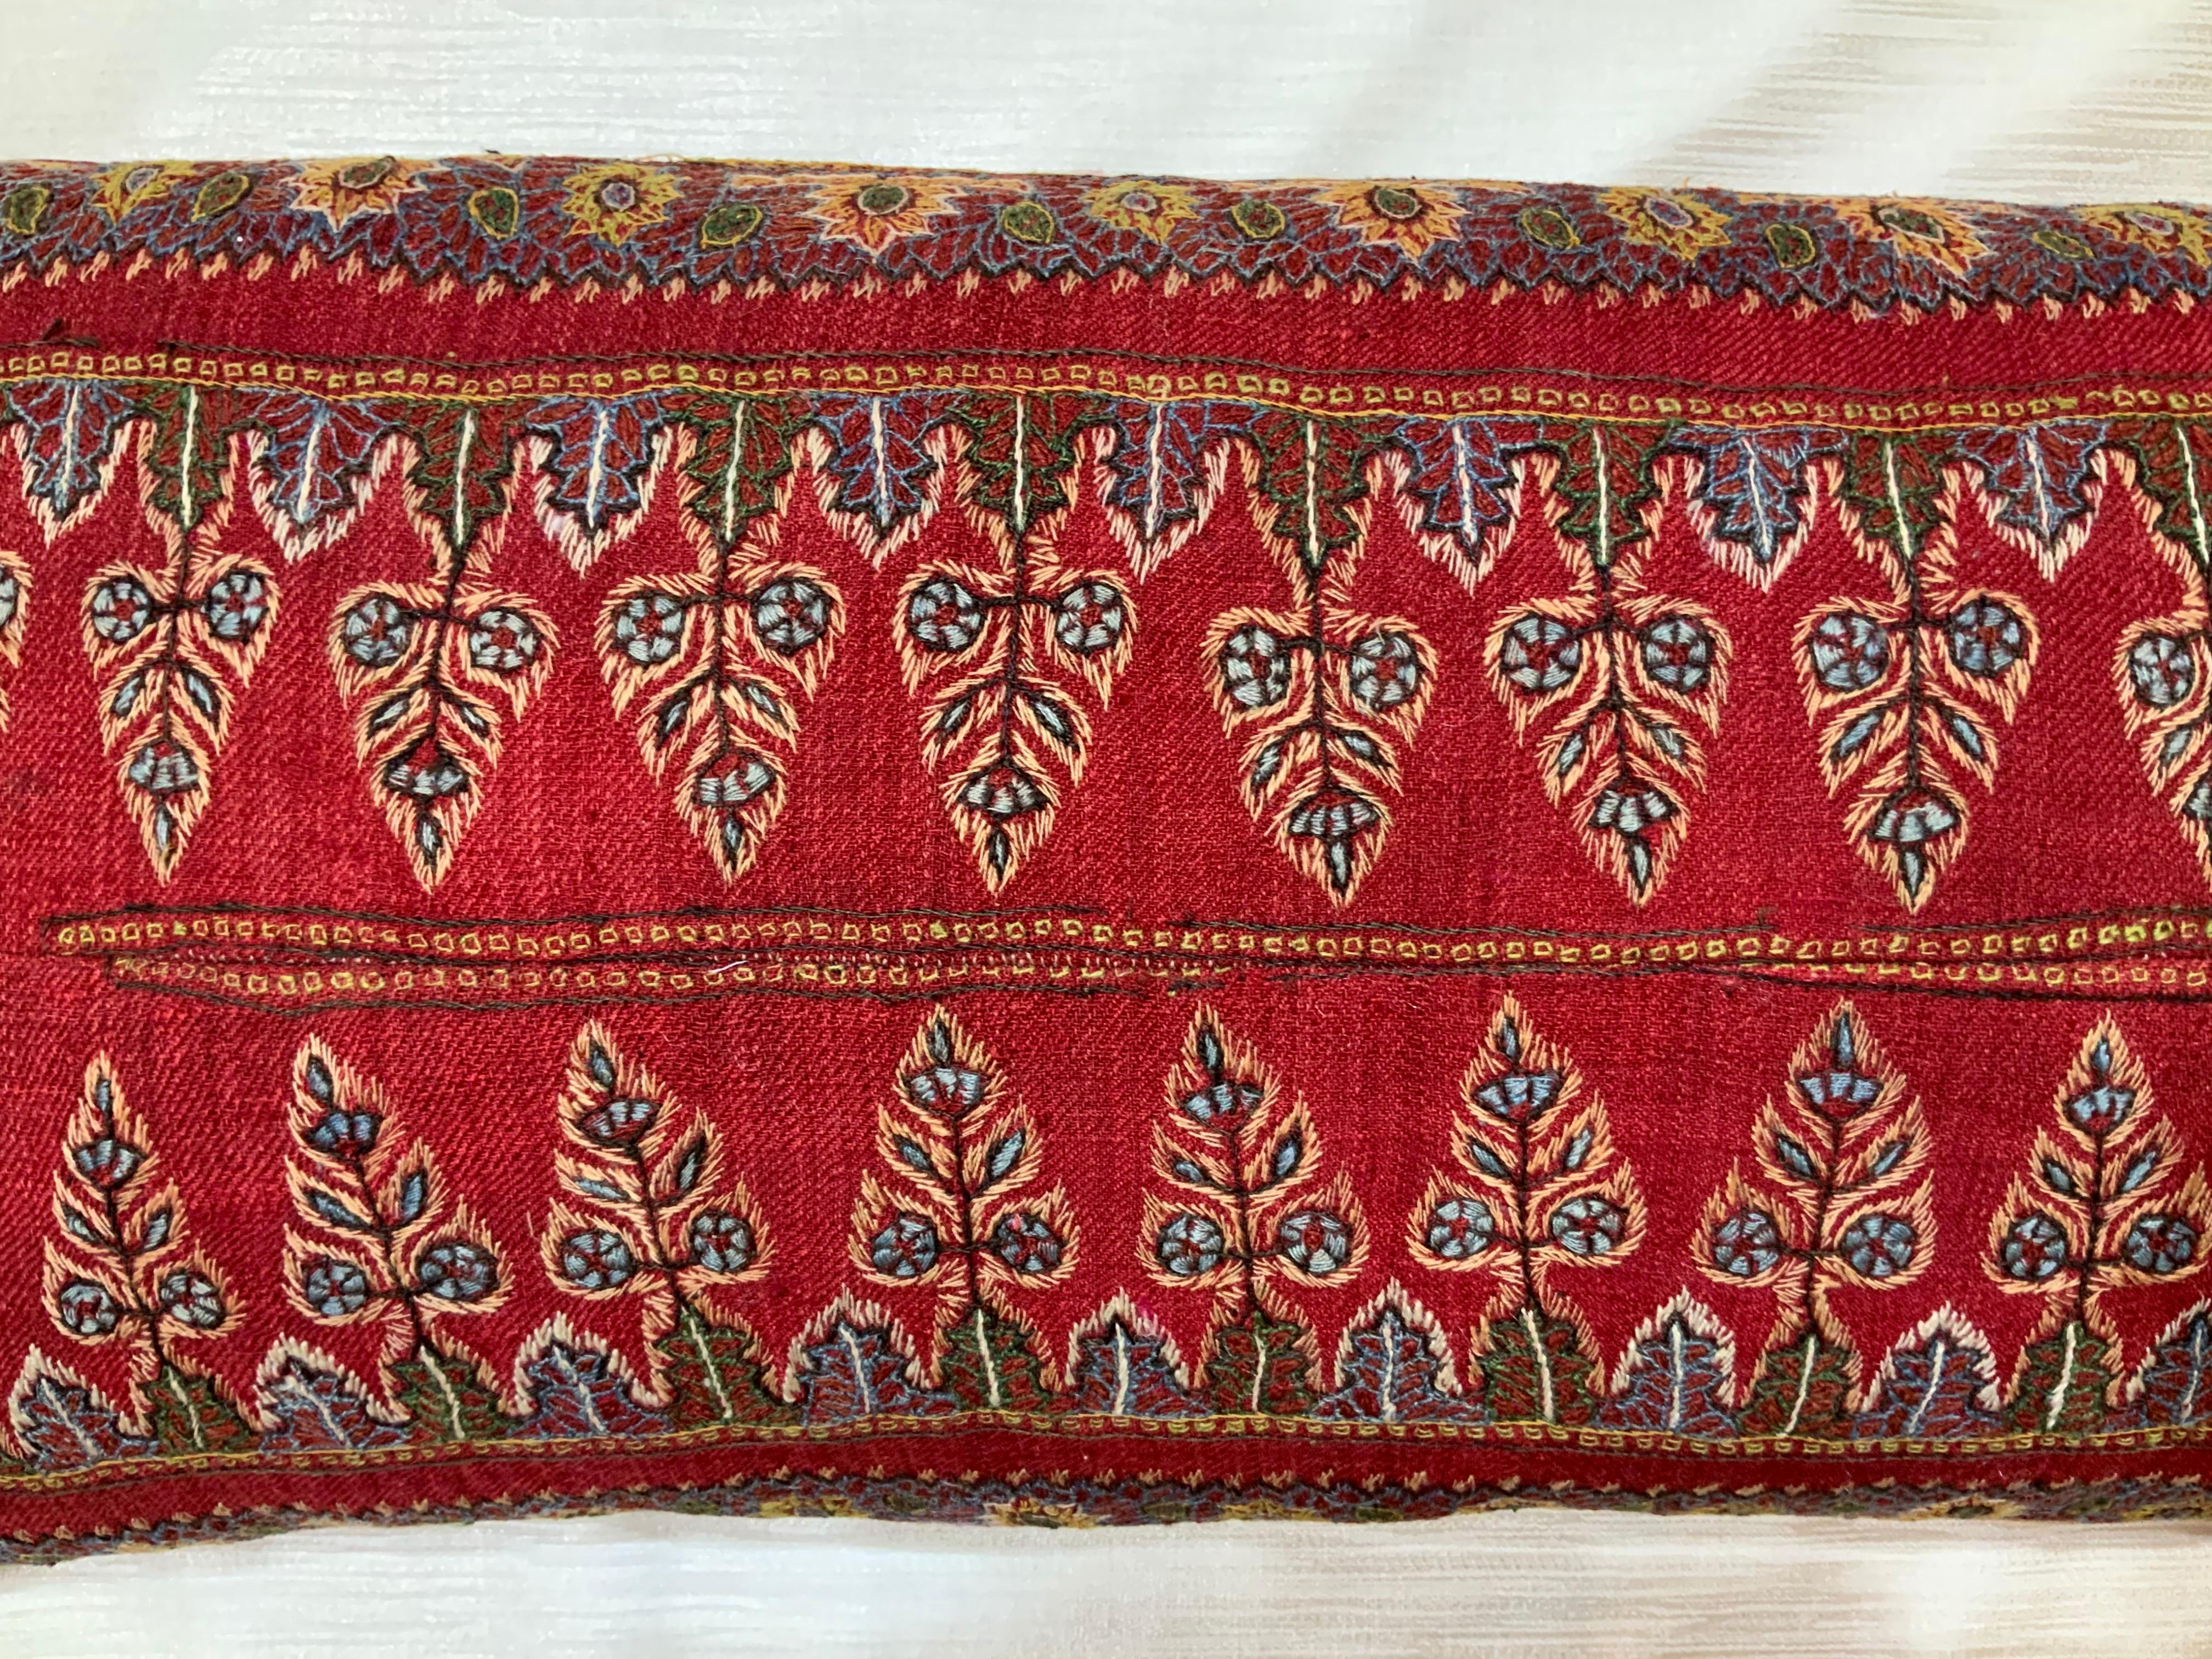 Wool Single Hand Antique Embroidery Suzani Pillow